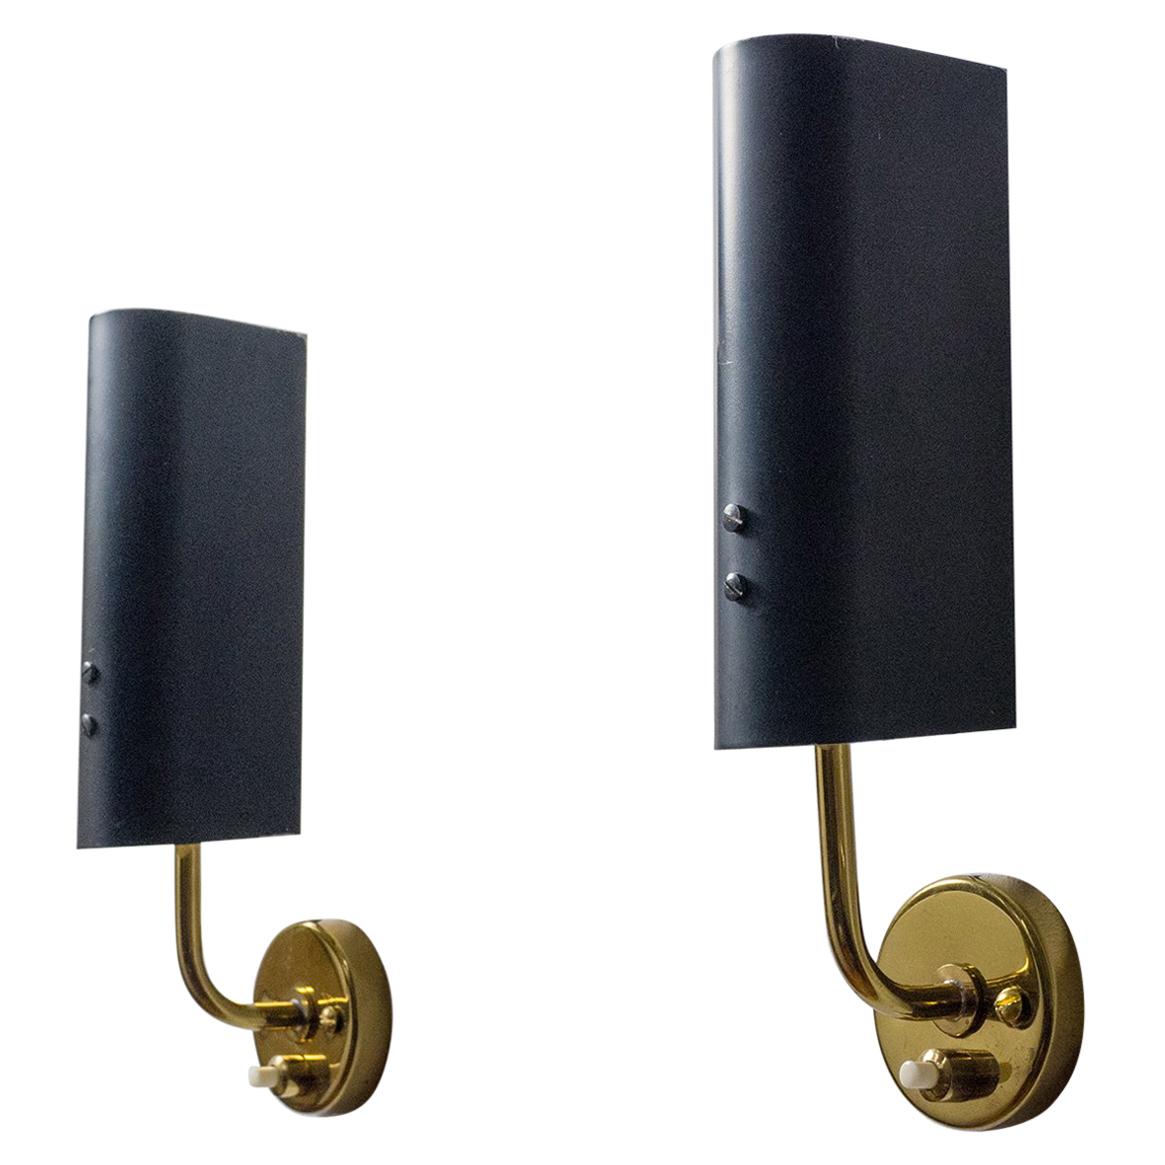 1950s French Modernist Sconces